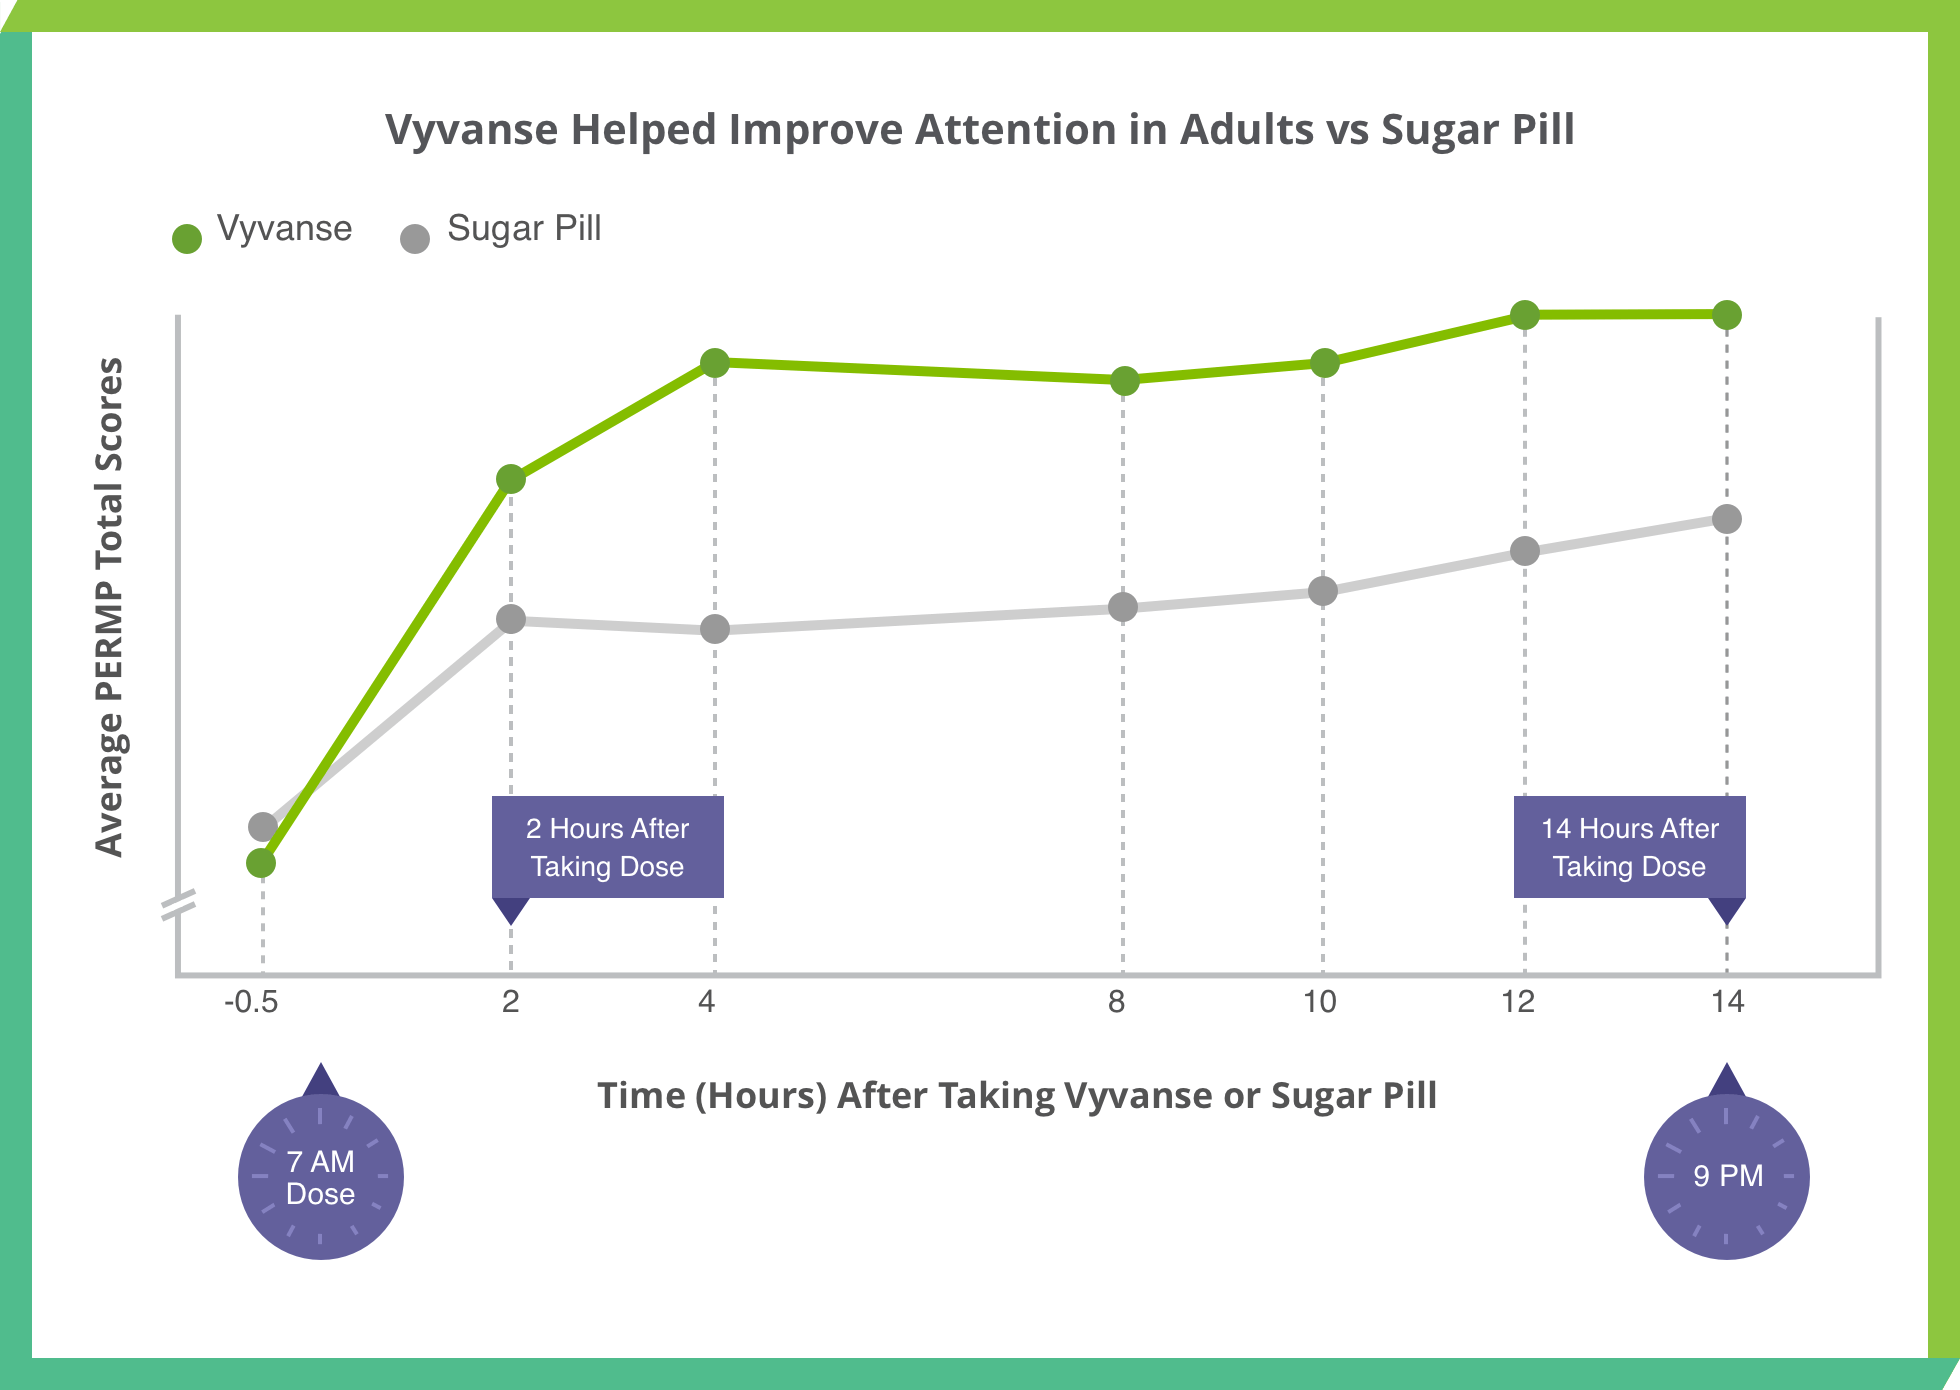 Graph depicting Vyvanse® Study 316 Results: Vyvanse® helped improve attention in Adults when compared to sugar pill.